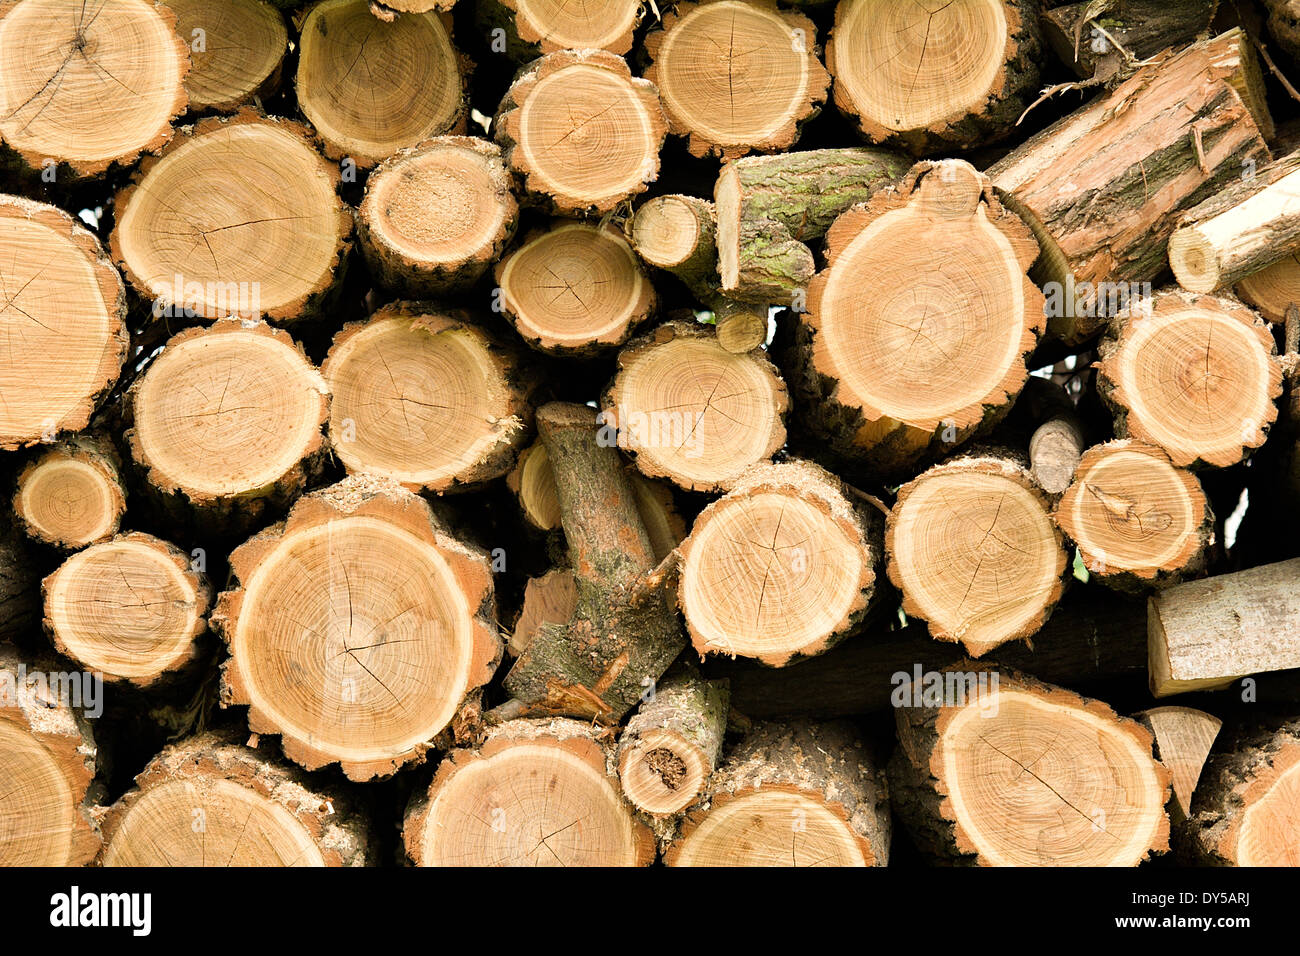 Pile Of Logs Small High Resolution Stock Photography and Images - Alamy